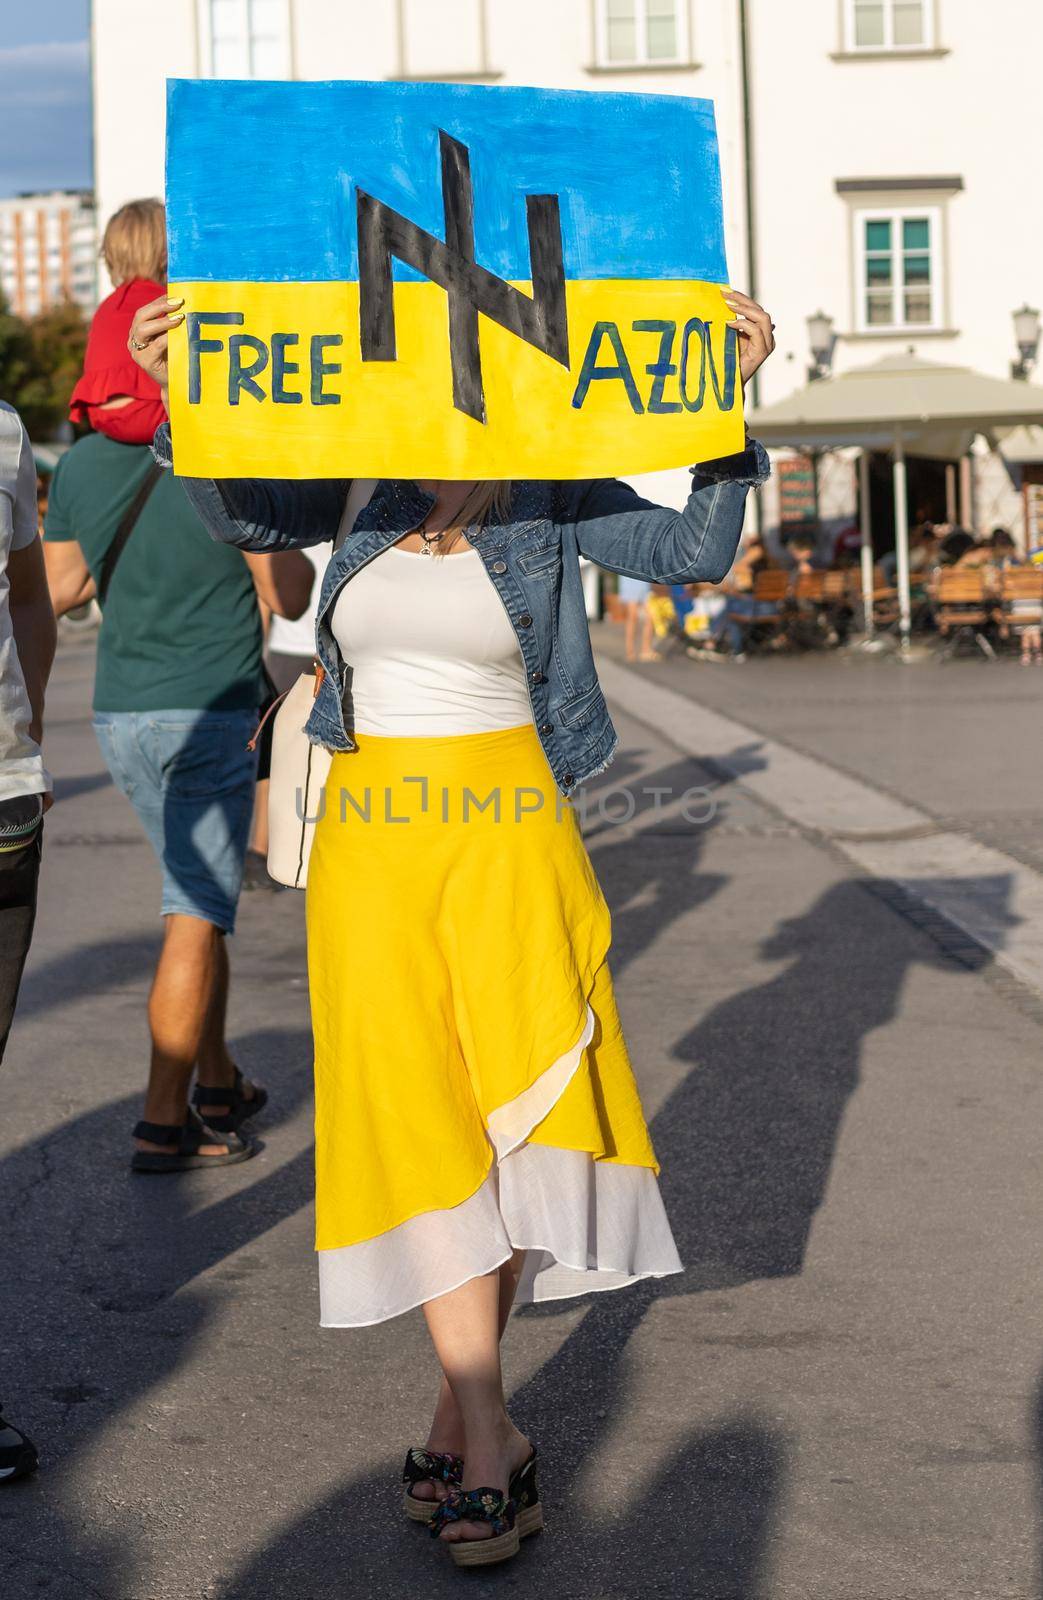 LJUBLJANA, SLOVENIA - August 24, 2022: Ukraine independence day meeting. People with flags and national symbols by Chechotkin